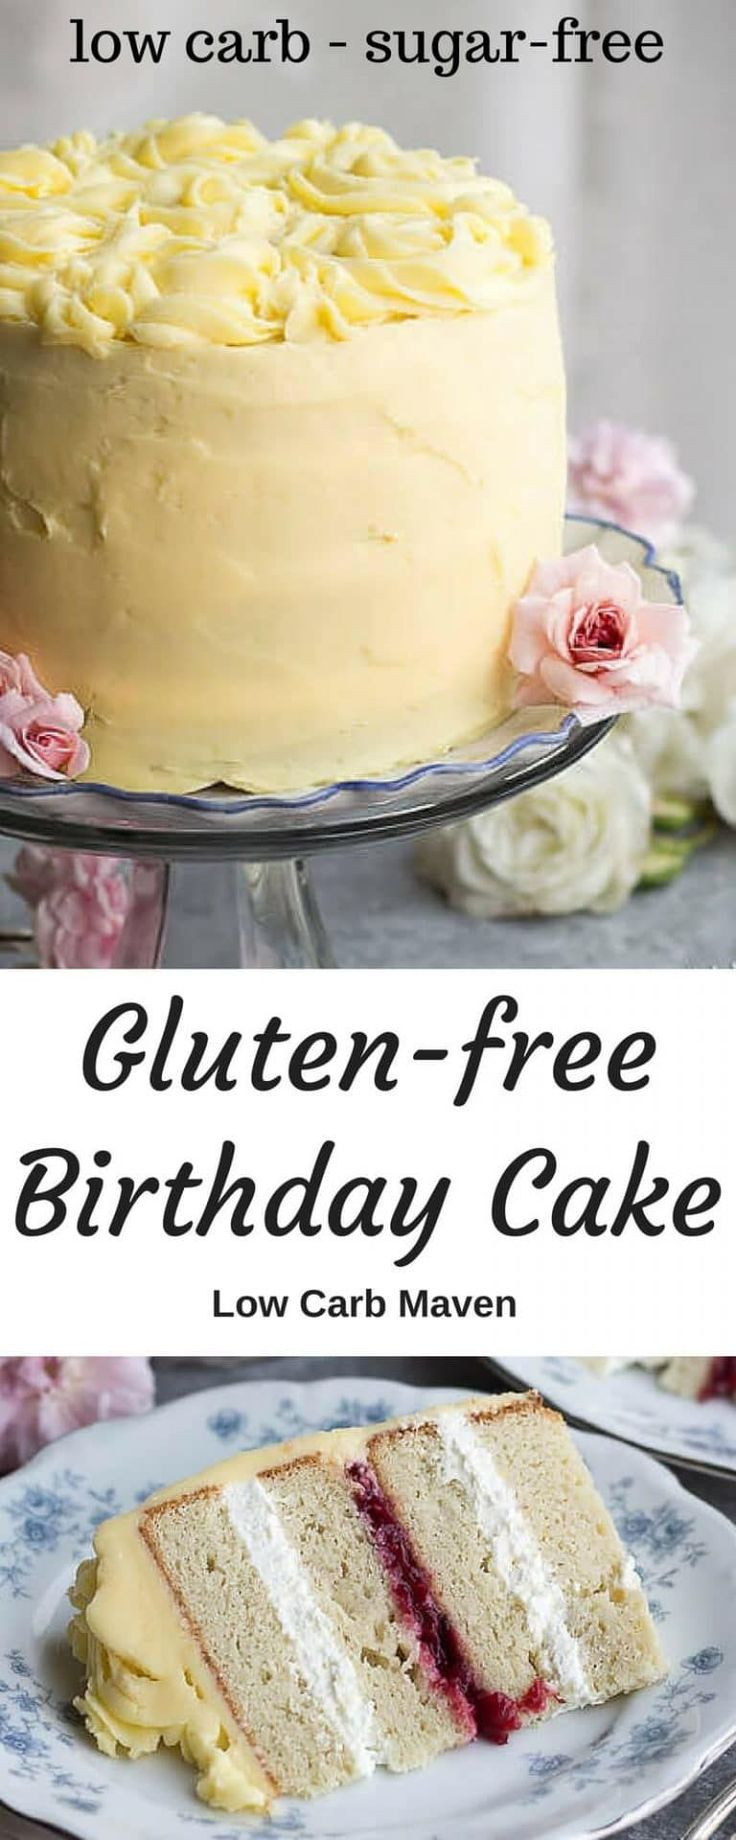 Low Carb Birthday Cake Alternatives
 7 best Success Stories images on Pinterest